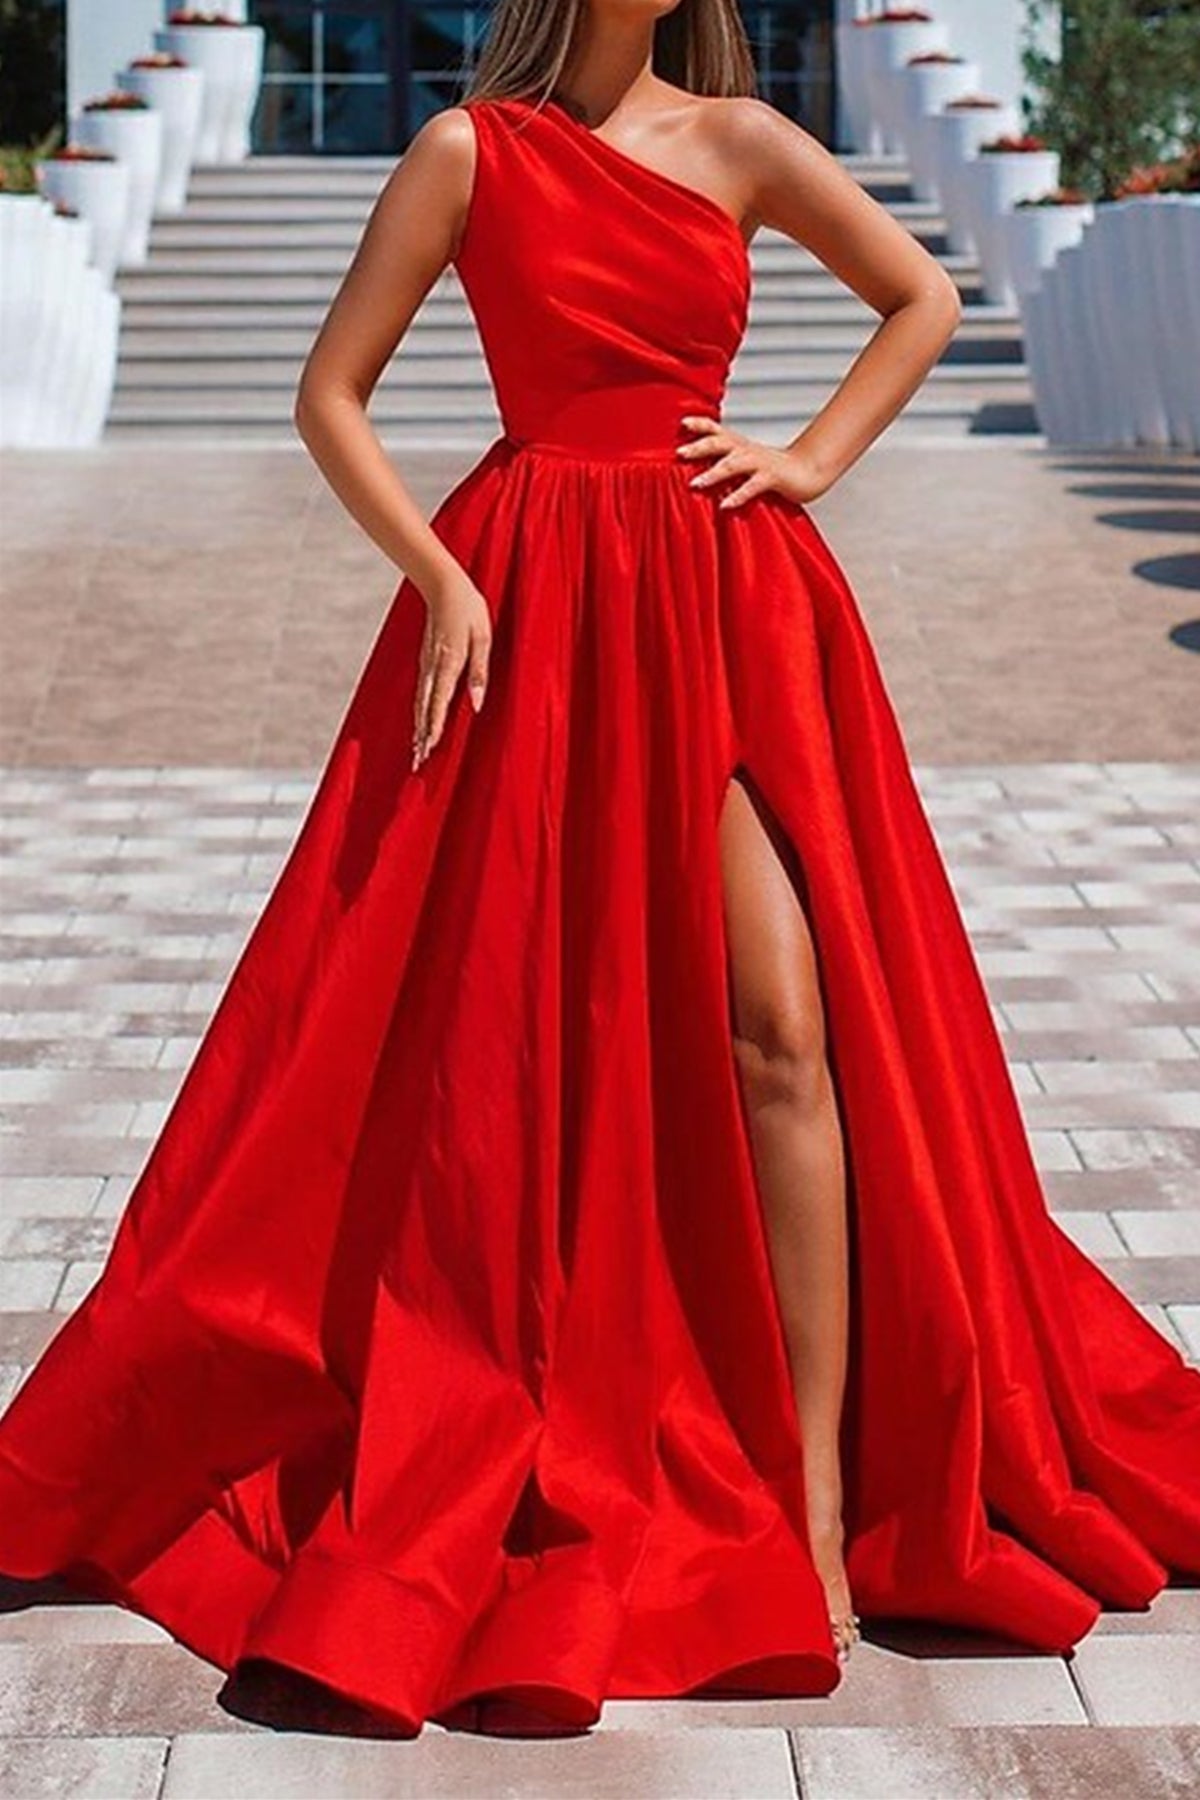 Red Velvet Sequin Short Sequin Cocktail Dress With Draped One Shoulder For  Preteen And Teen Girls Perfect For Pageants, Formal Parties, Weddings,  Proms, Homecoming, And Interviews From Uniquebridalboutique, $64.16 |  DHgate.Com